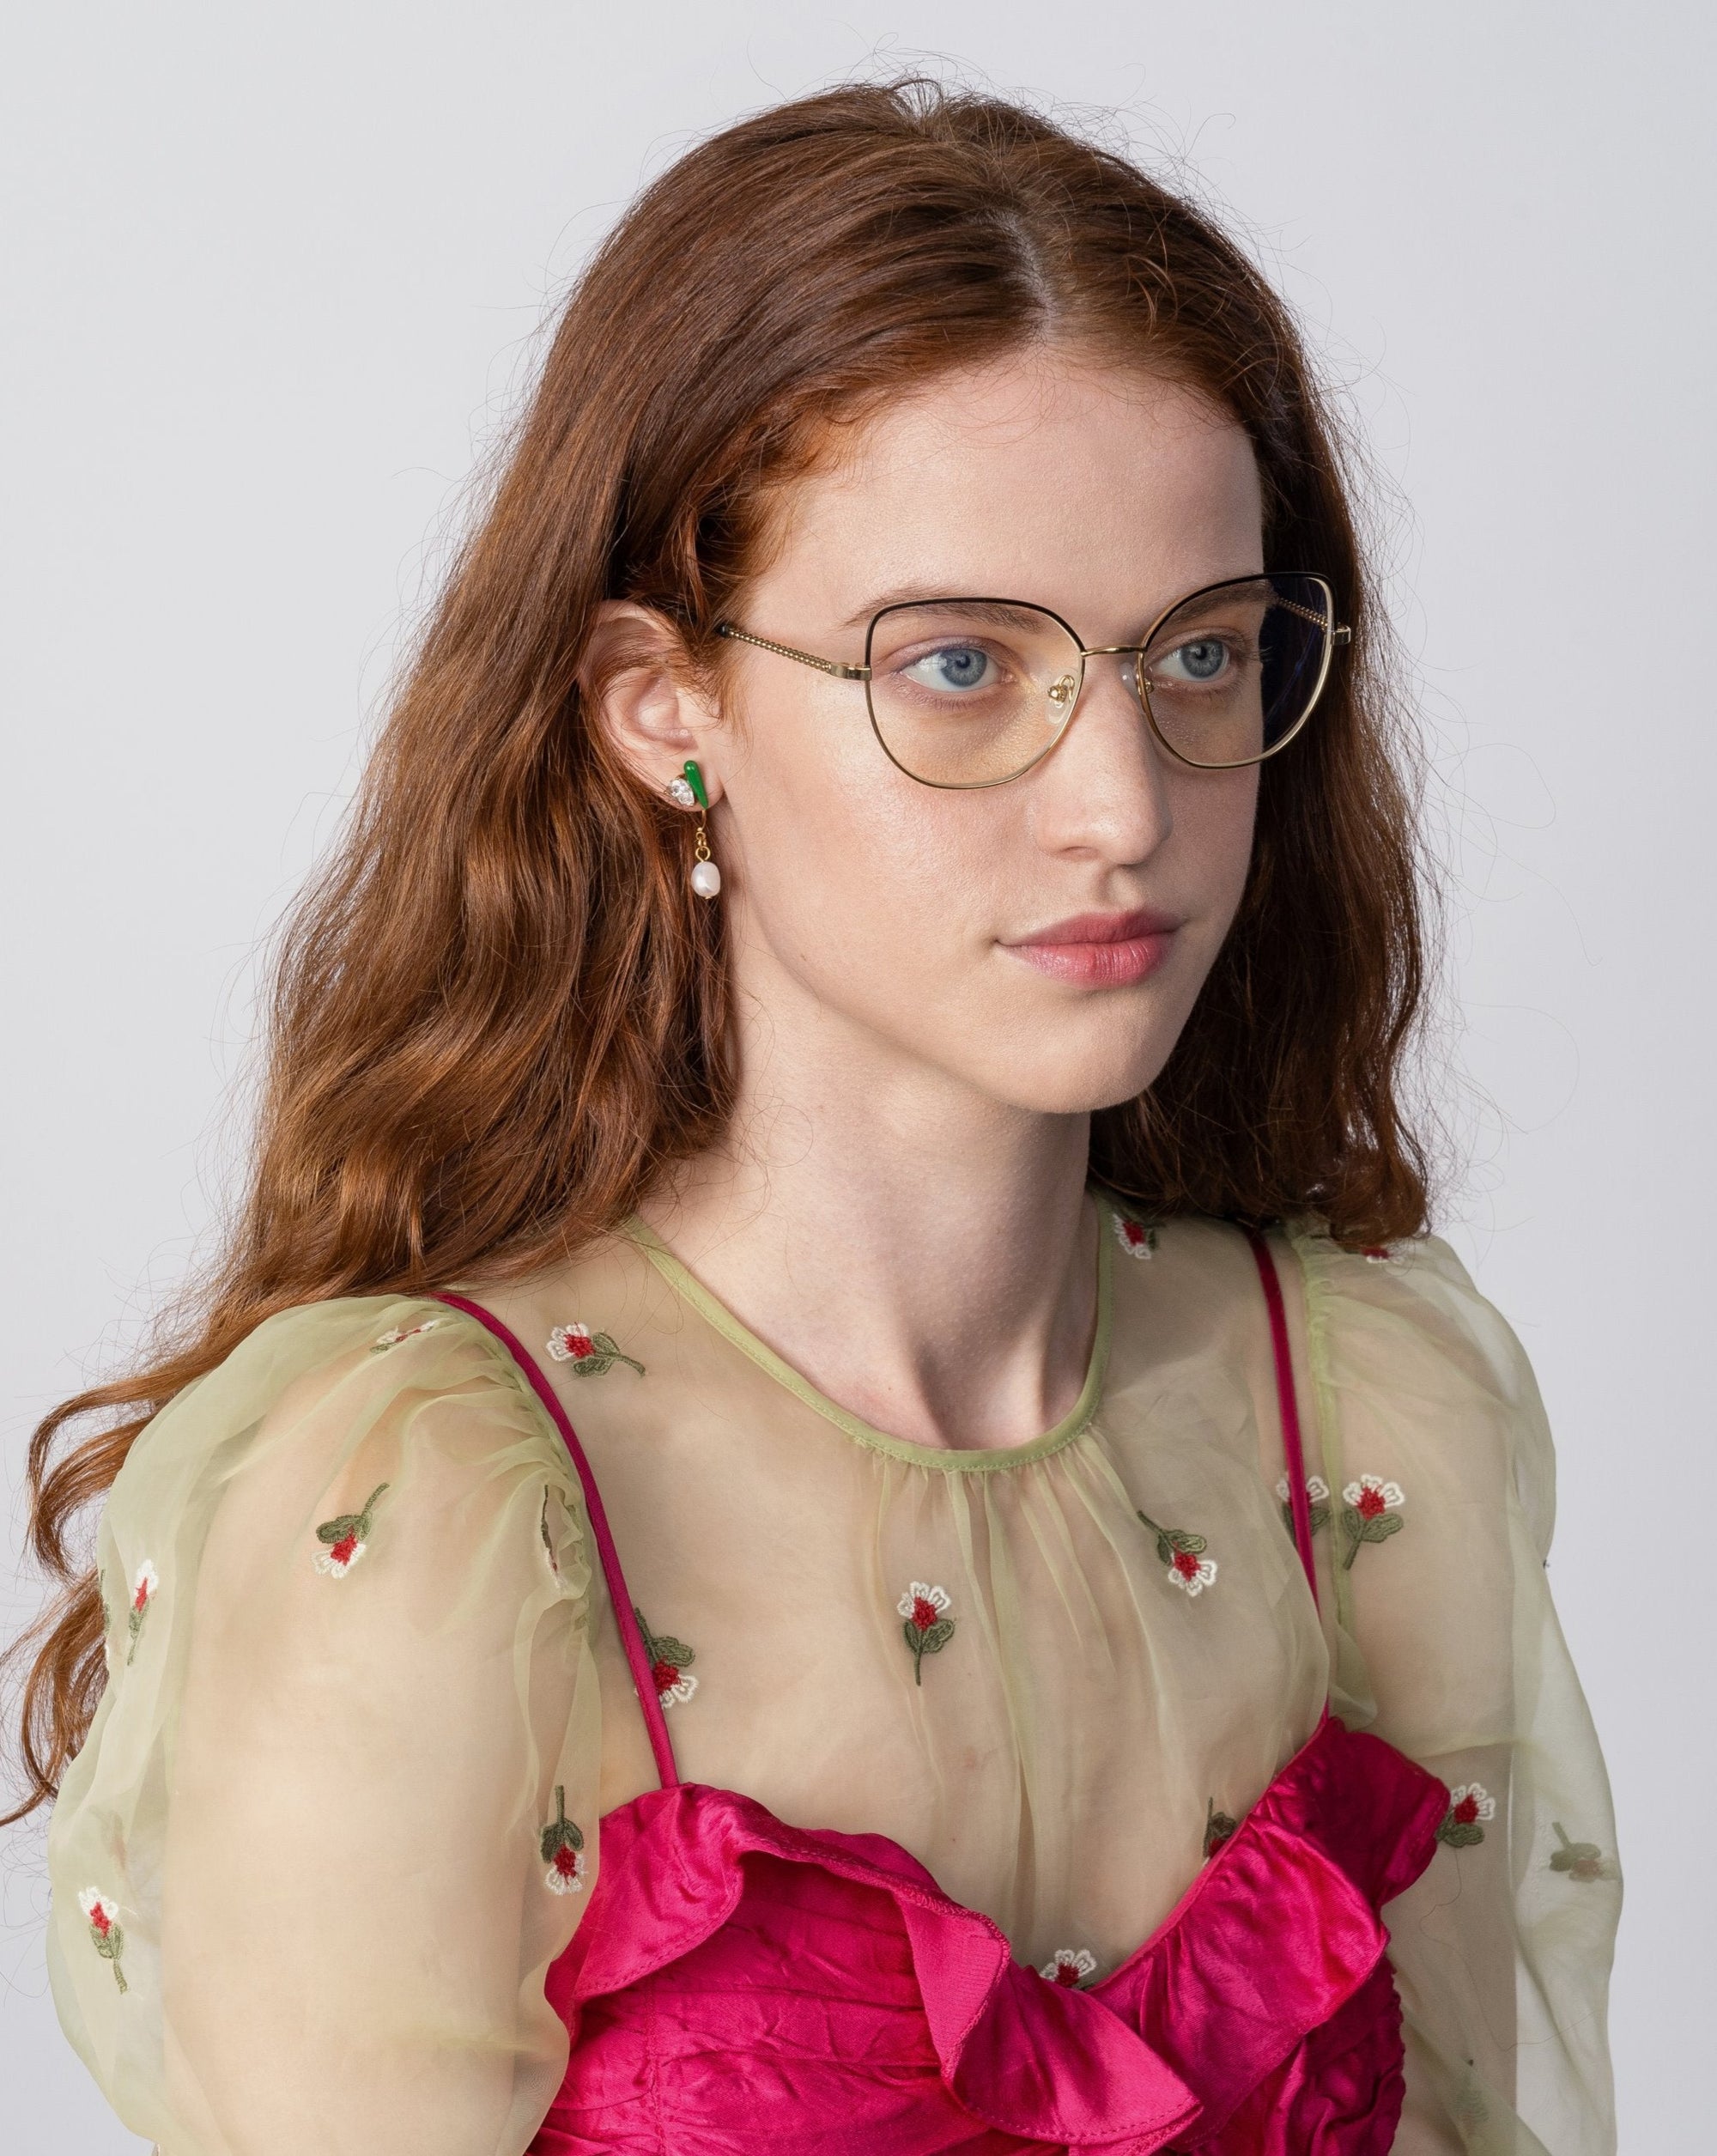 A woman with long, wavy red hair, wearing Ophelia glasses by For Art's Sake® with a cat-eye silhouette and green-and-gold earrings, is dressed in a sheer, light green blouse with embroidered flowers over a bright pink, textured top. She is looking slightly to the side against a plain, light gray background.